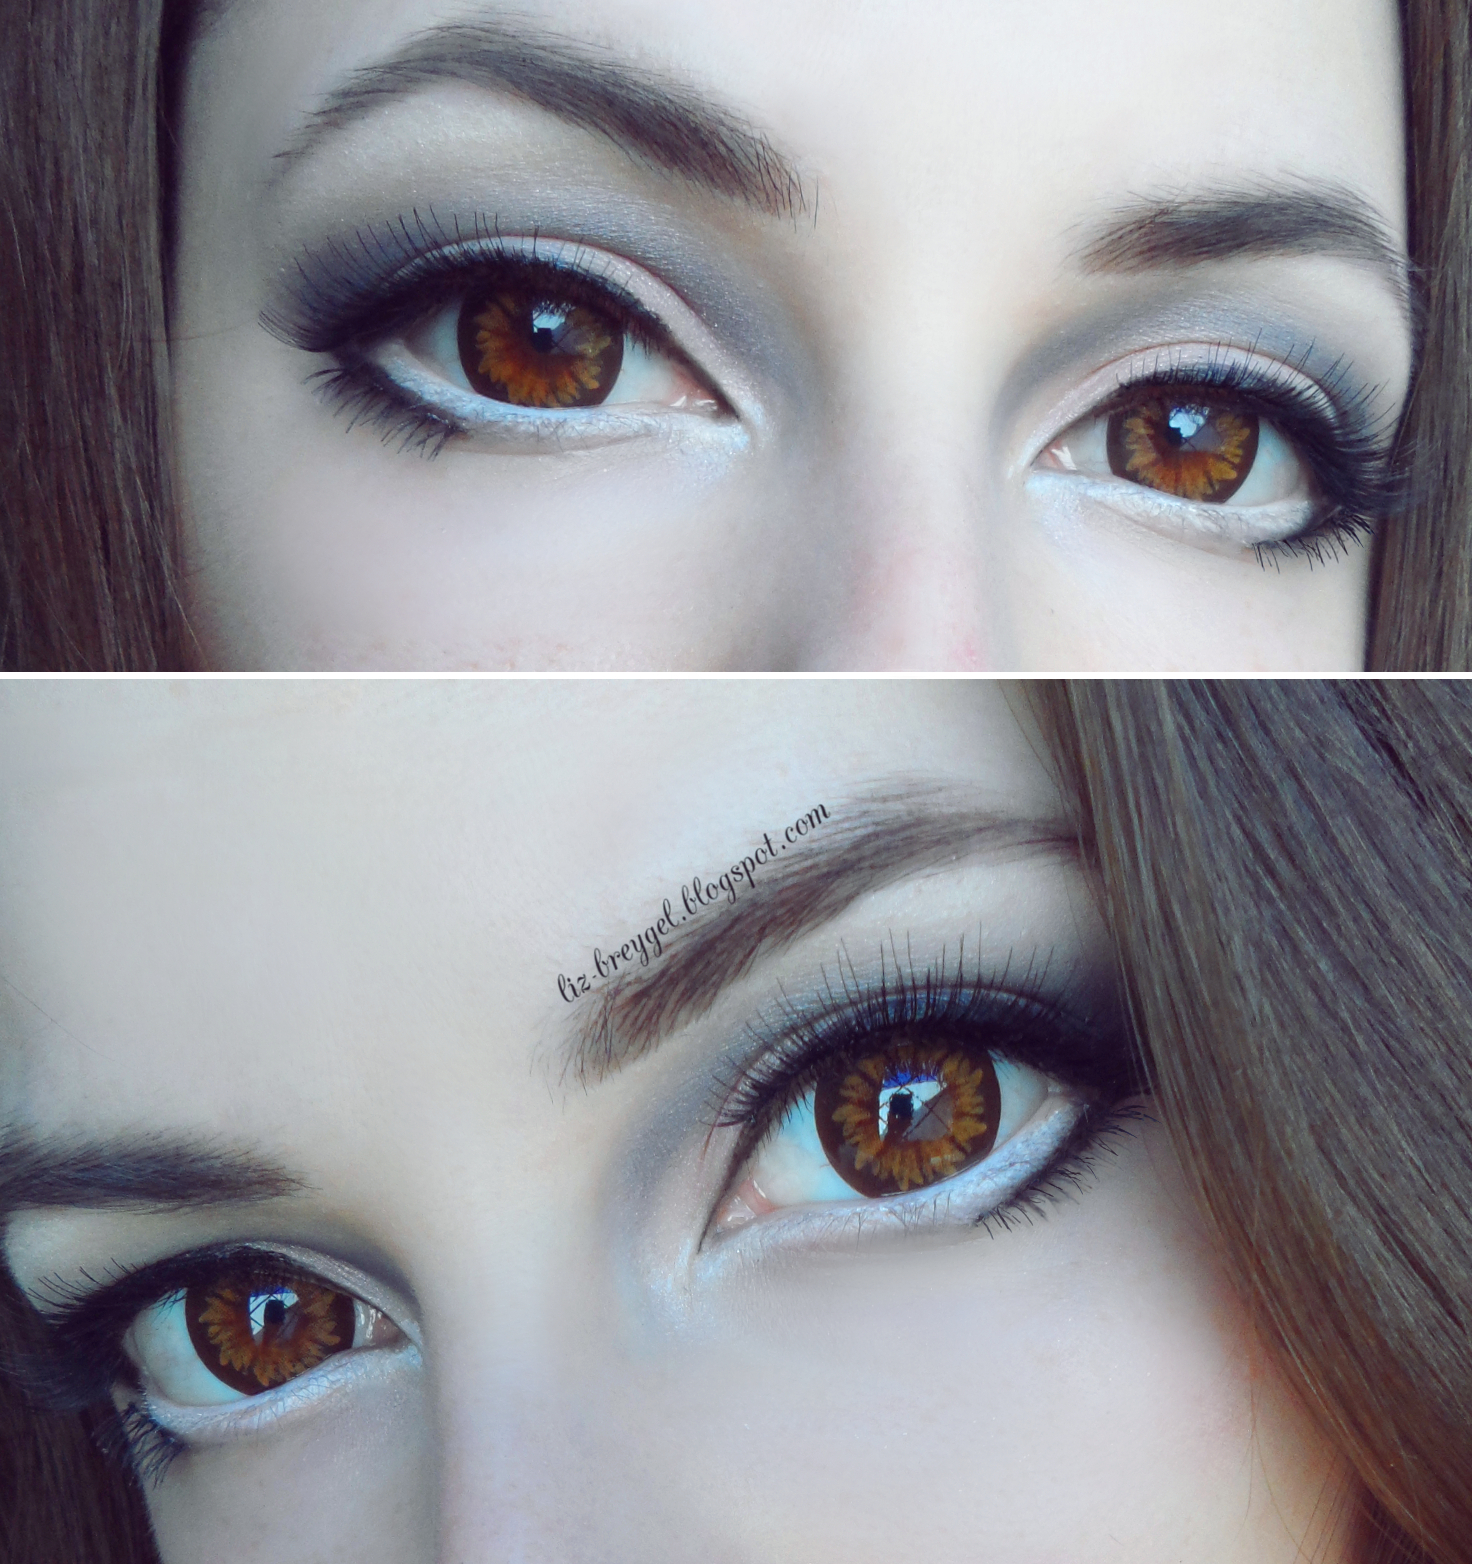 big doll porcelain bjd doll eye look with circle lenses a tutorial and pictures by blogger,  большие кукольные глаза макияж и туториал блог, チュートリアルで目を拡大するアニメの目の外観